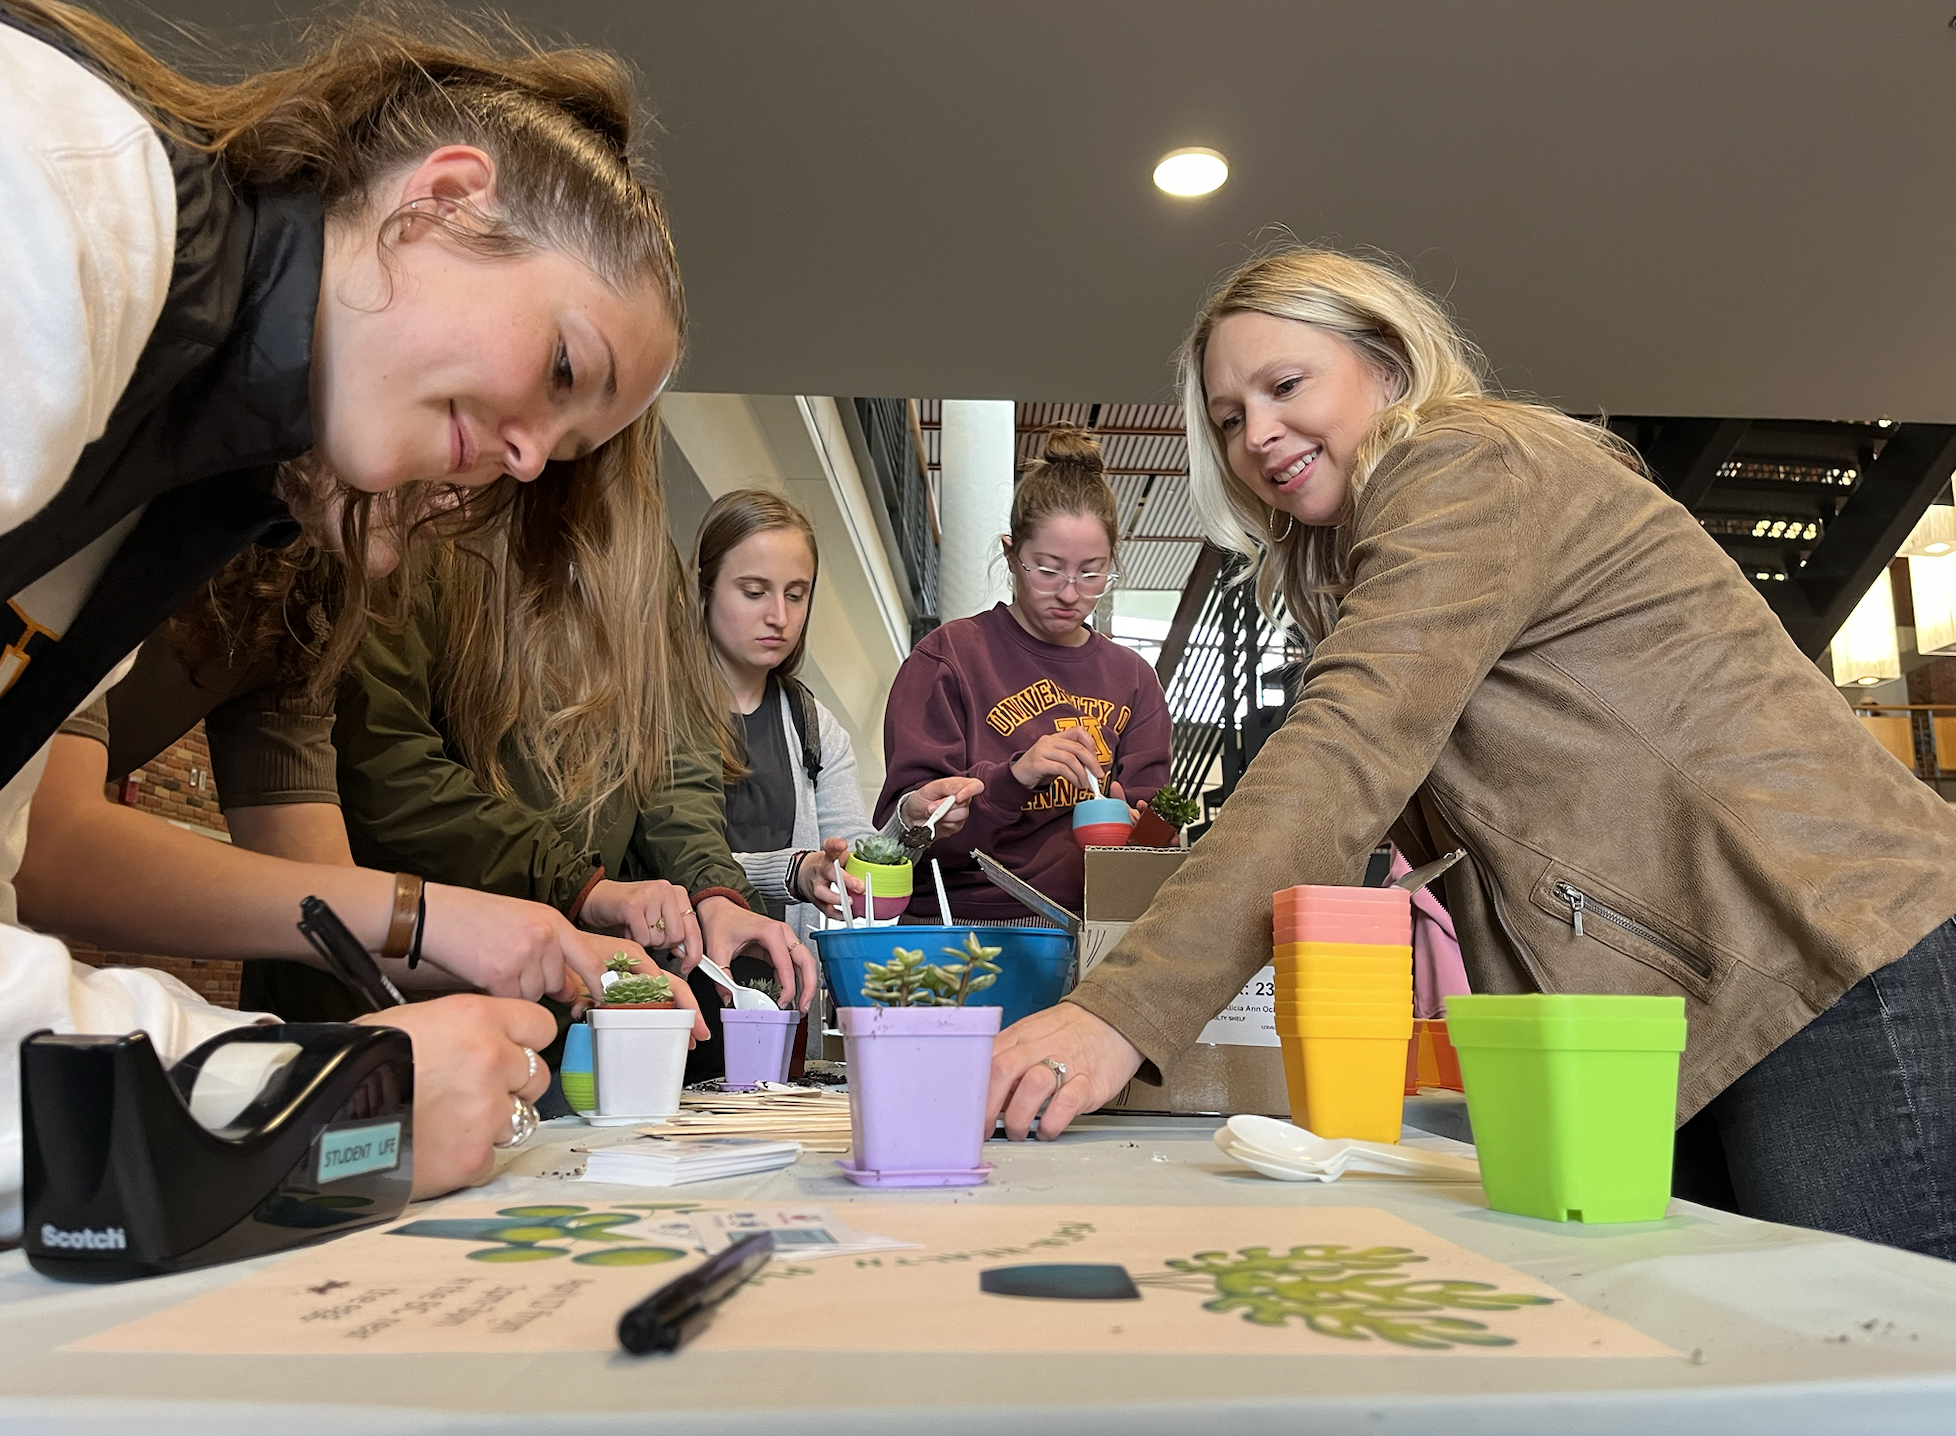 Bethel University senior Hailey Gregg leans in close to her plant as she writes its name down on one of the wooden sticks that have been provided, while Alisha Ochs, one of the organizers of the “get your emotional support plant” event smiles at her, passing more of the wooden sticks down to the end of the table. The event was held in the Brushaber Commons, Wednesday at 1:00 p.m. and was planned by Be Well at Bethel to raise awareness of the importance of mental health.